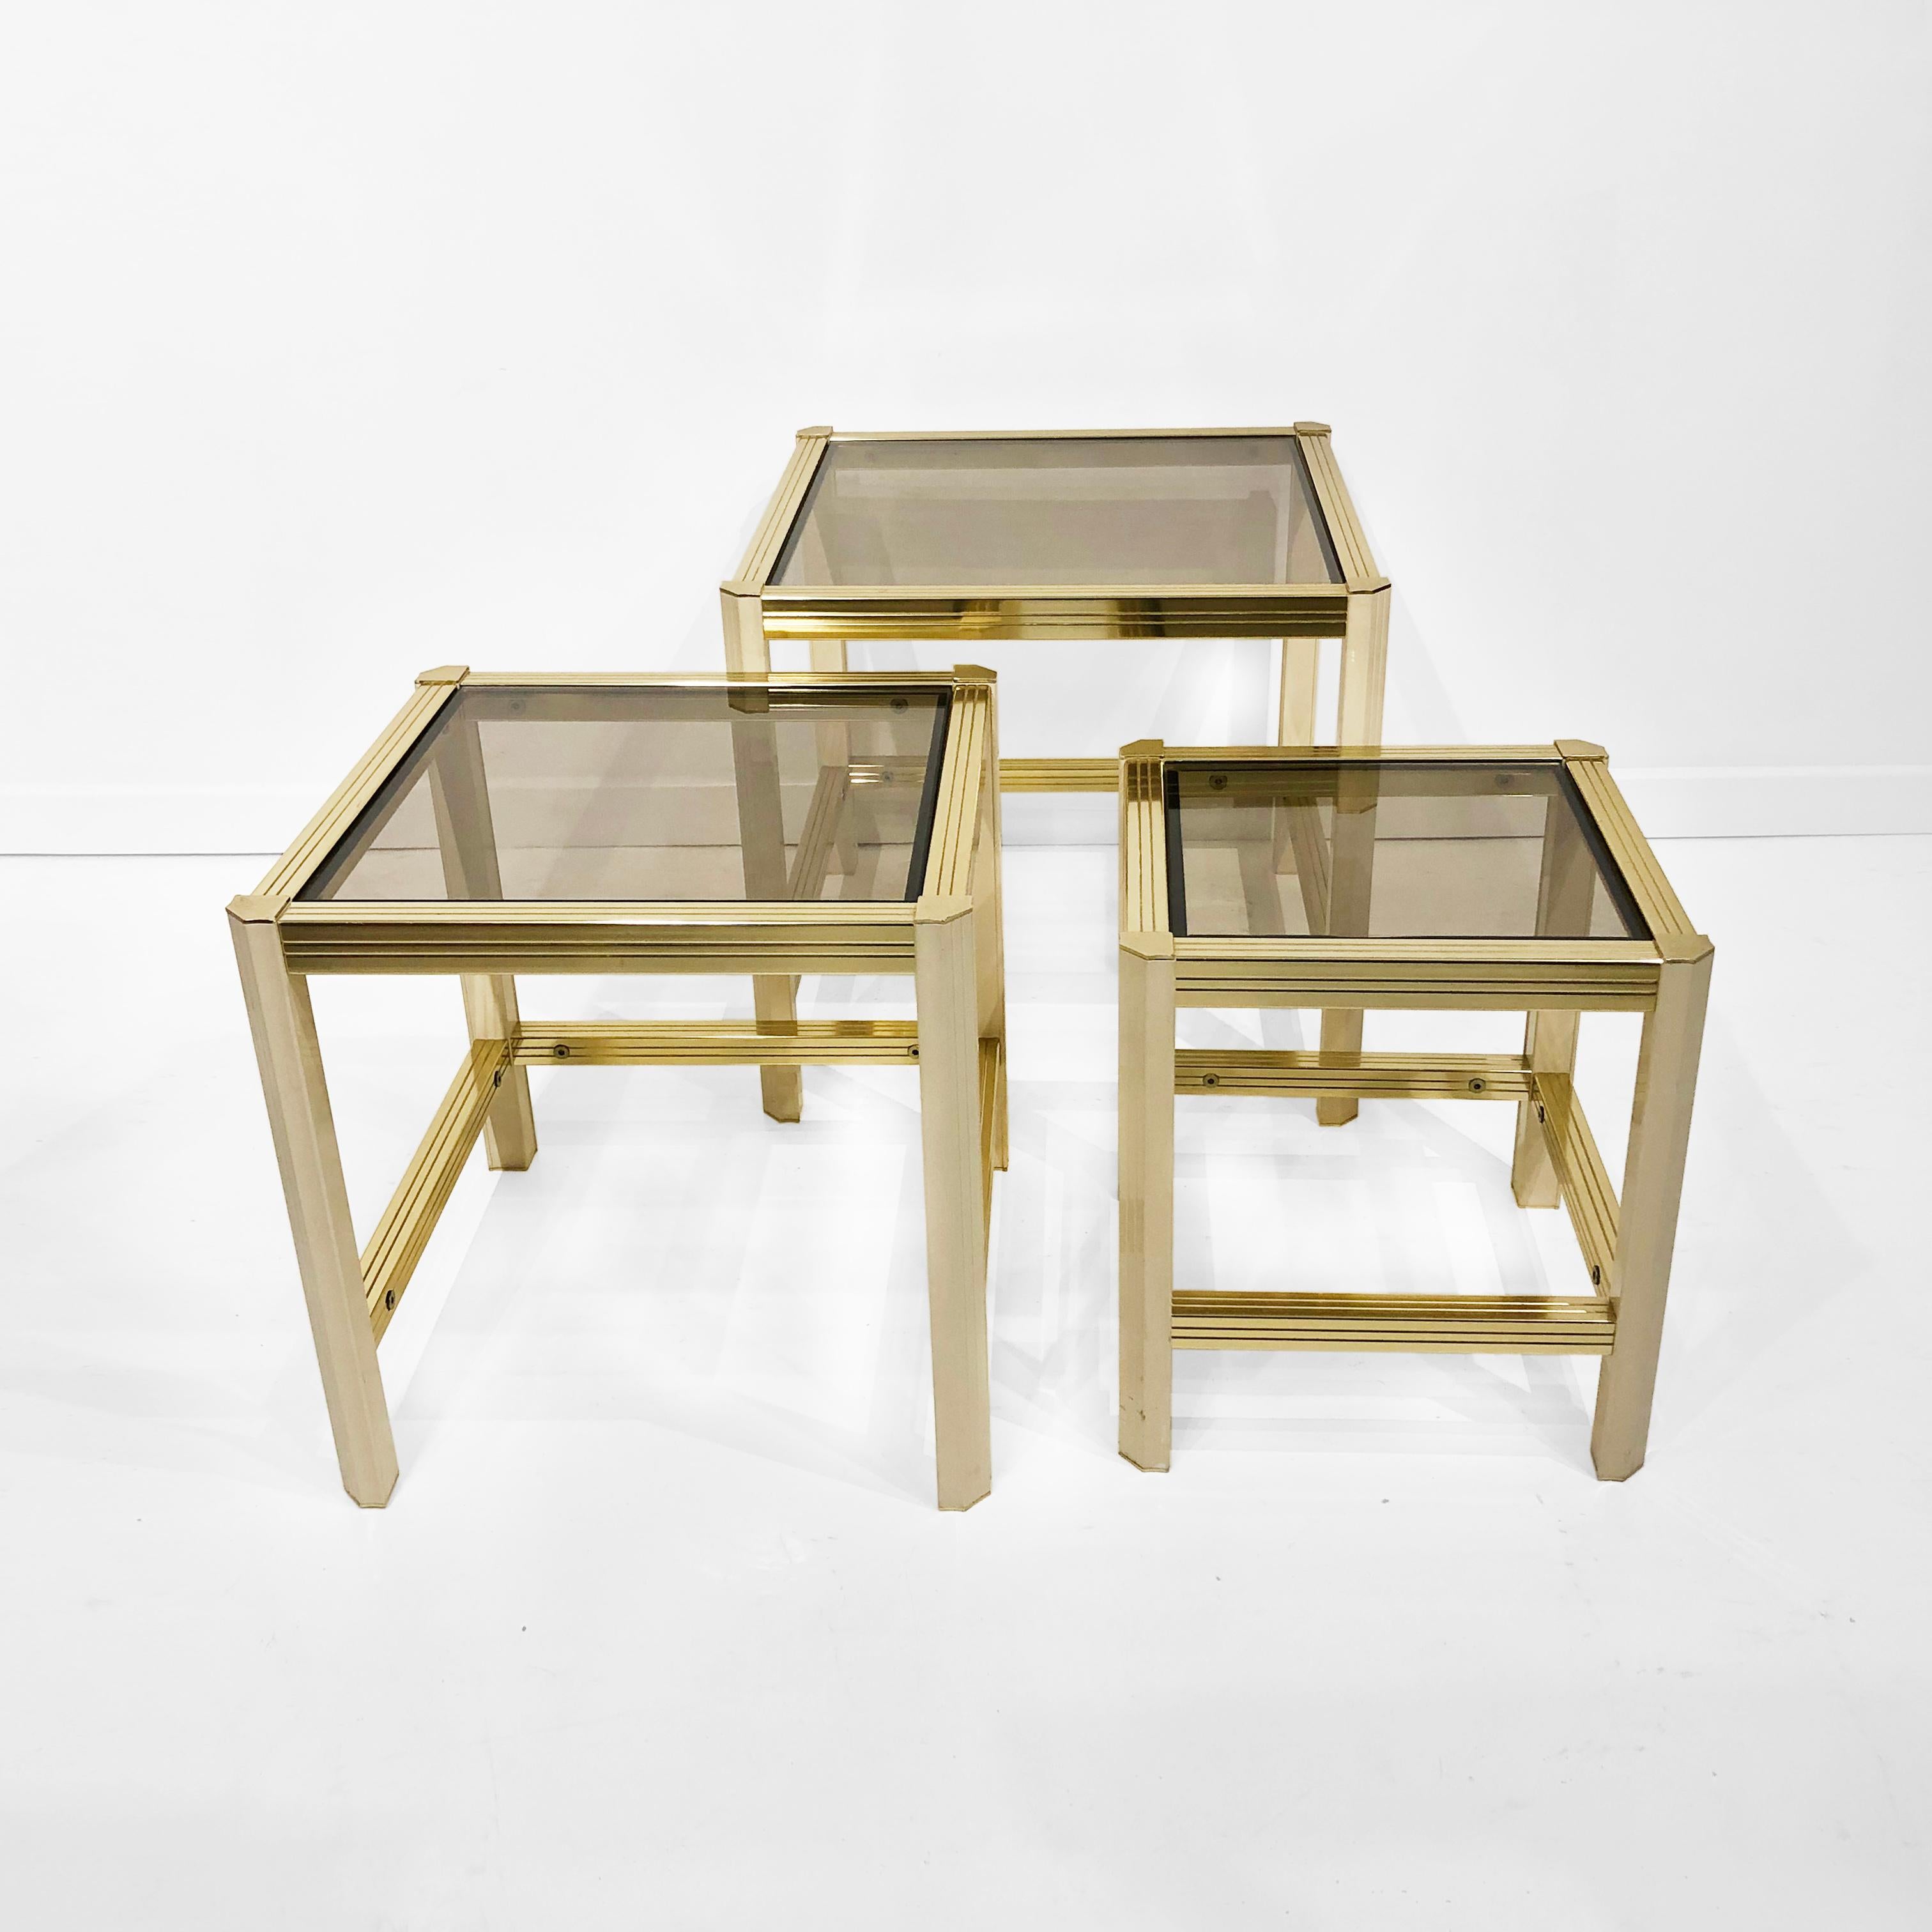 French Brass Beige Nesting Tables 1970s Hollywood Regency Smoked Glass Side Sofa 4